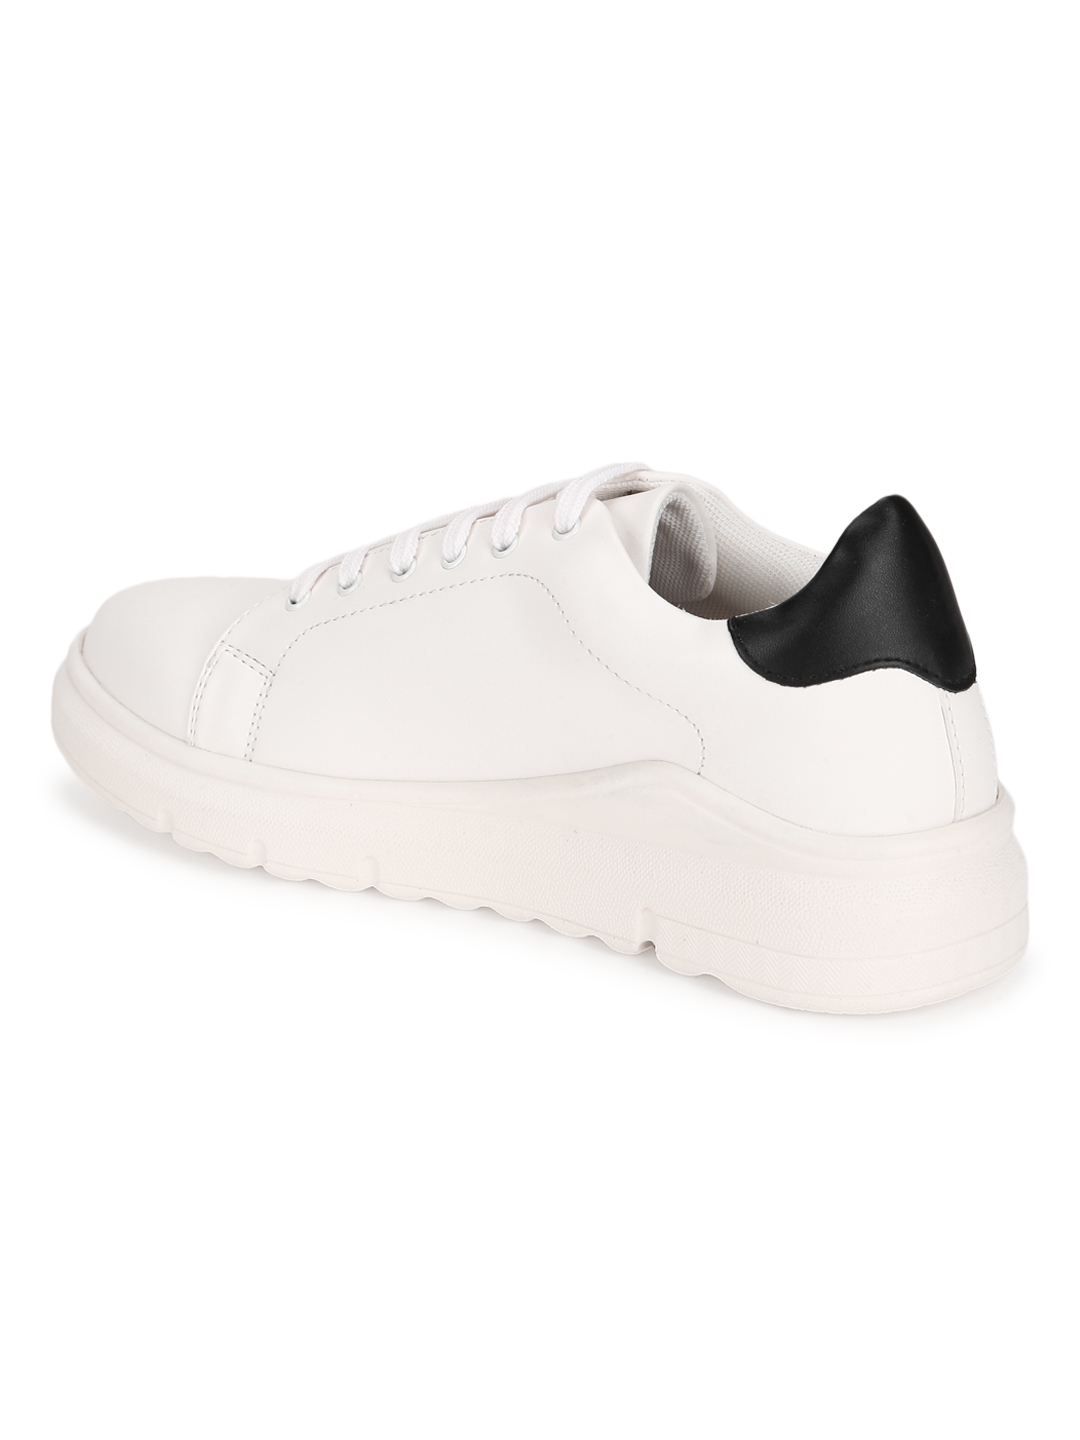 White PU Sneakers With Back Details